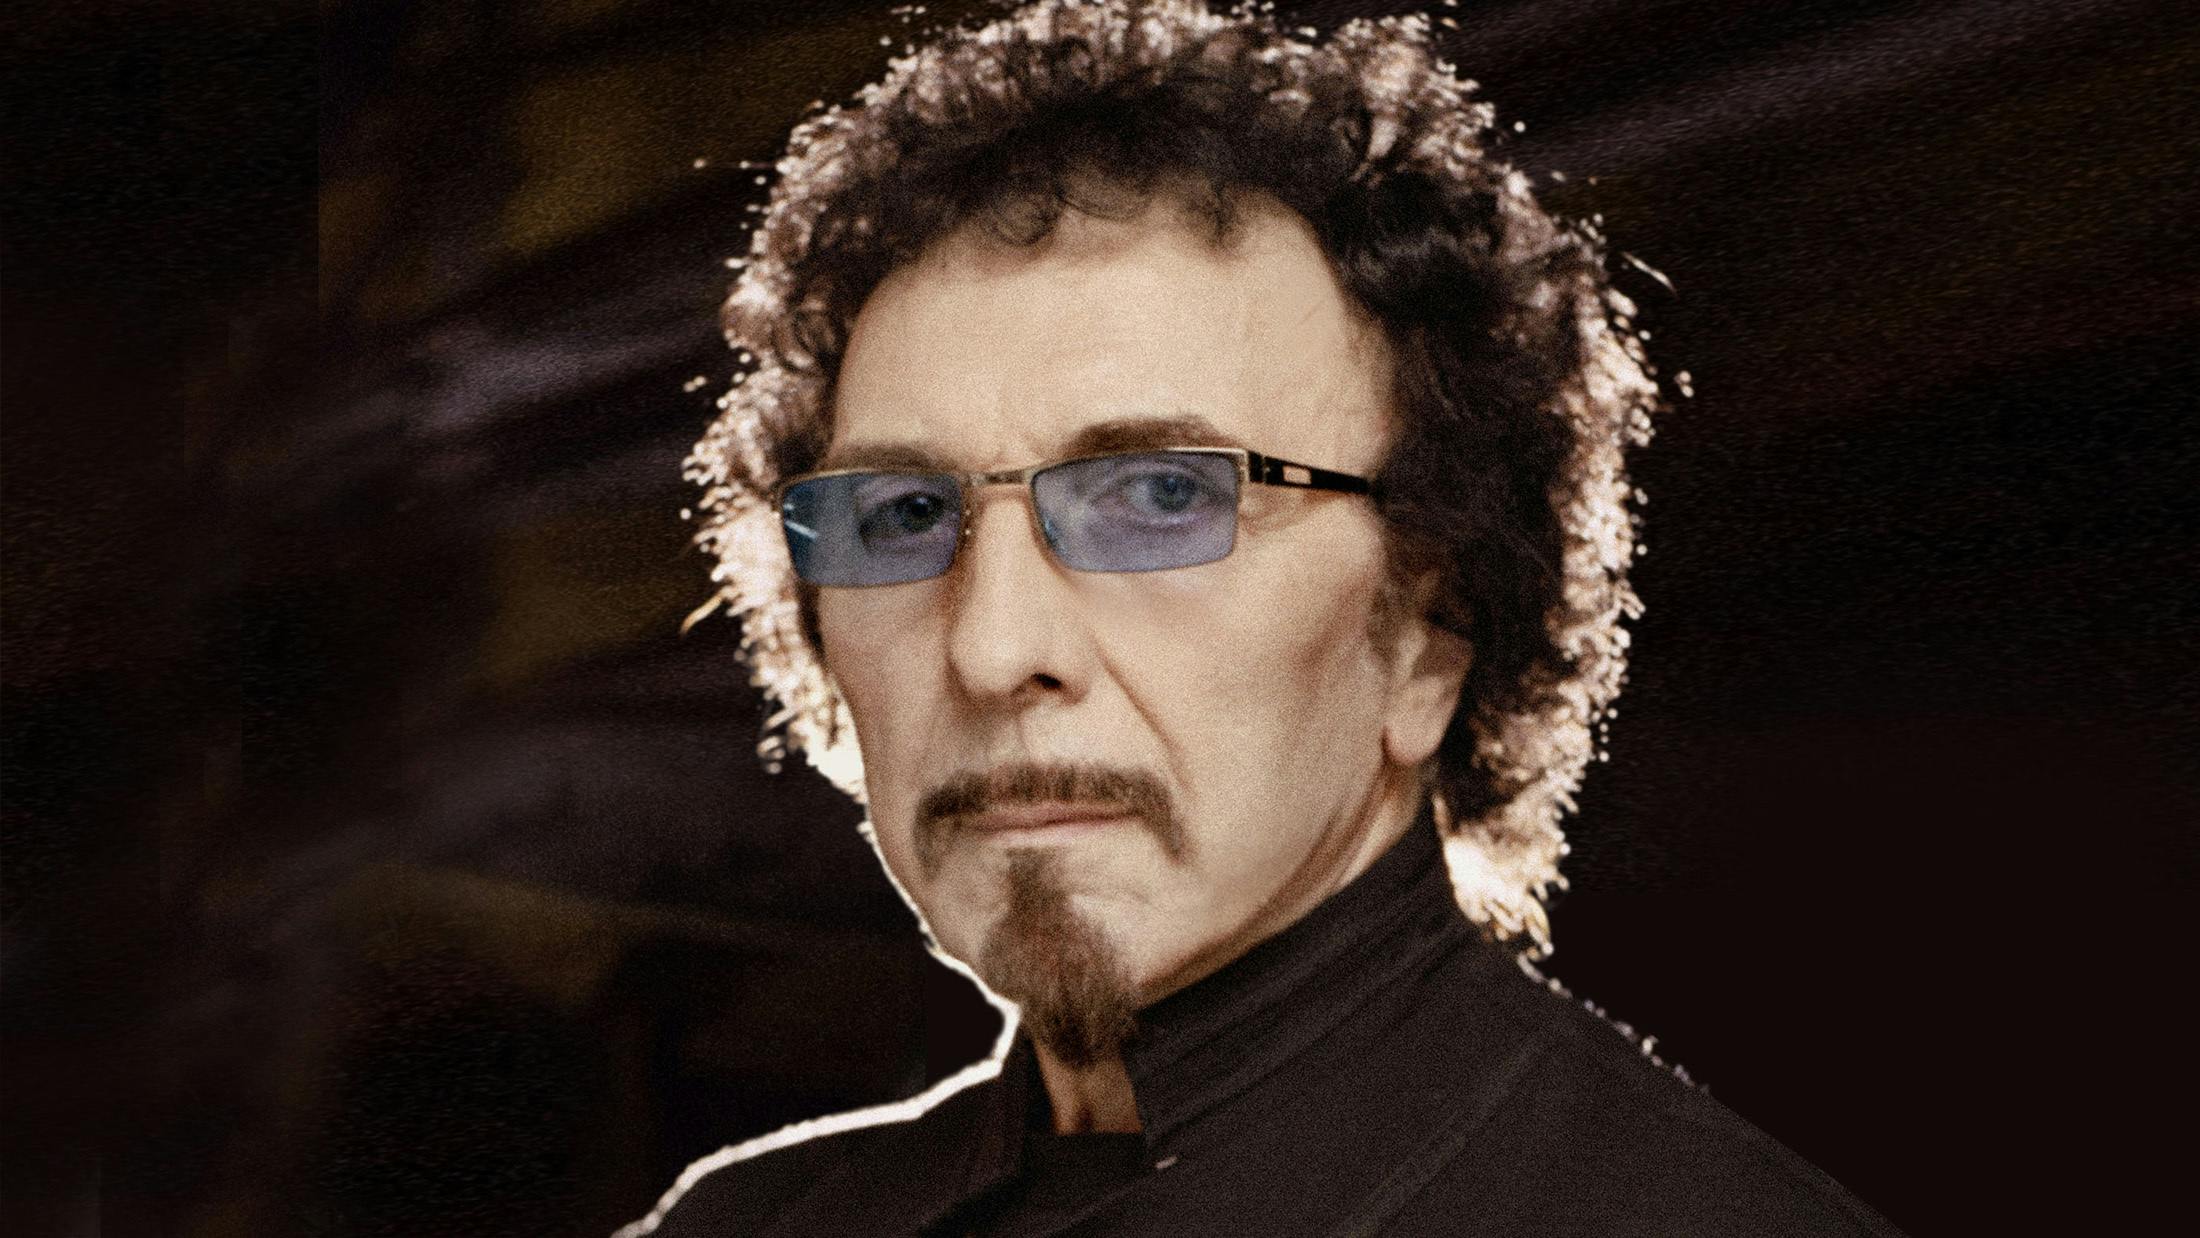 Tony Iommi: "I Can't Sit Still – I Have To Be Involved In Something"